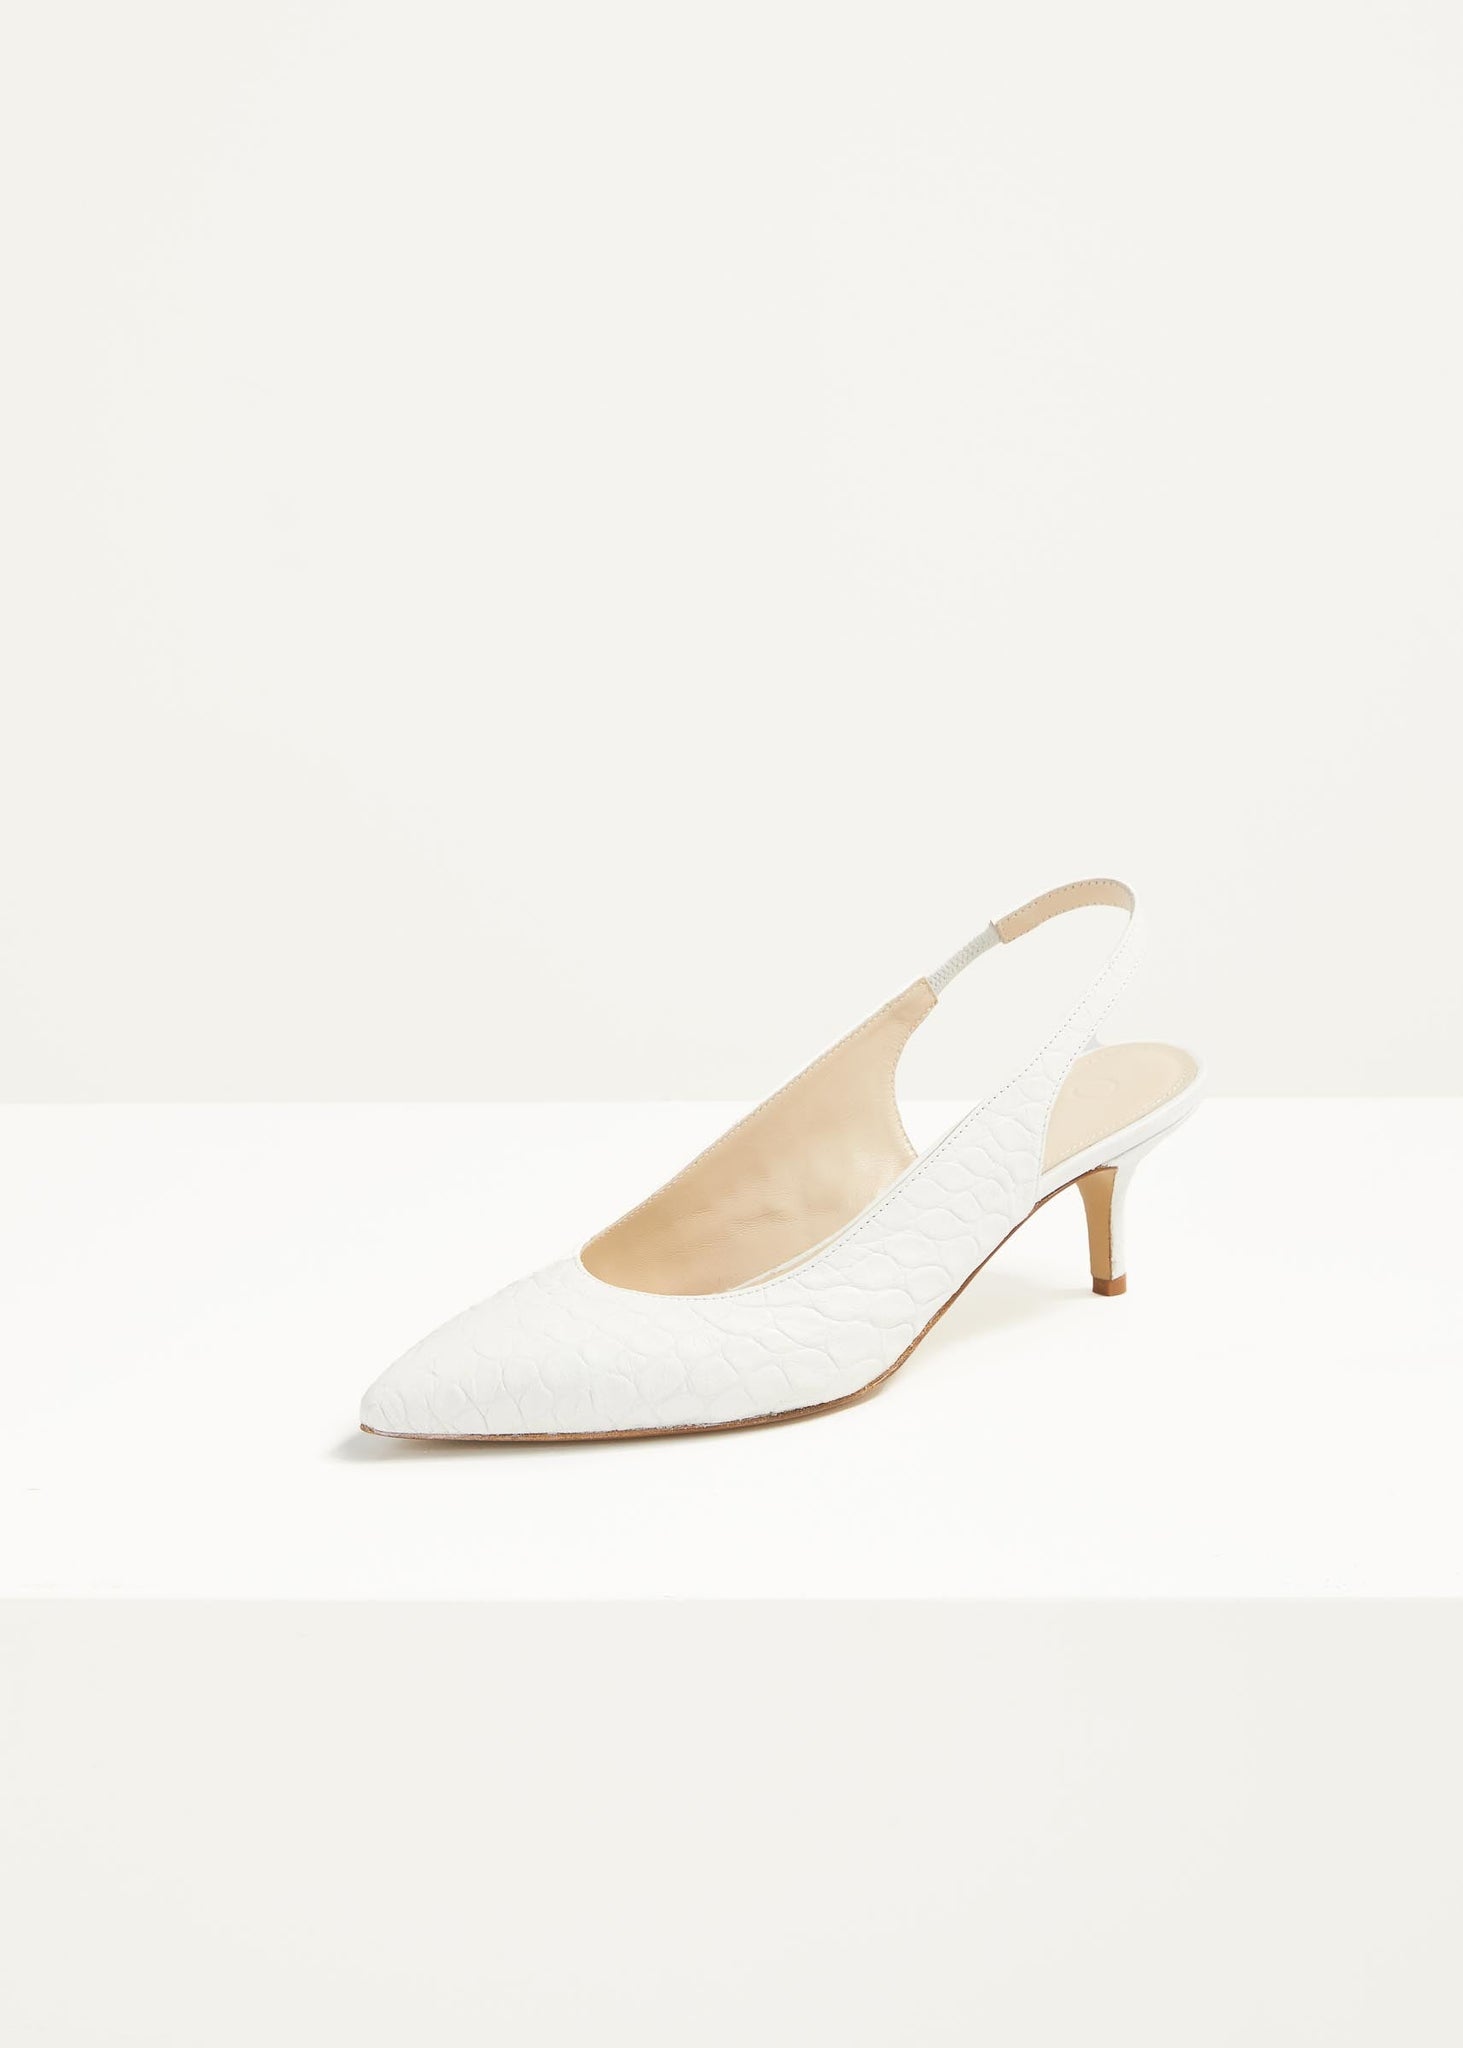 SUSIE PUMPS in WHITE EMBOSSED CROC